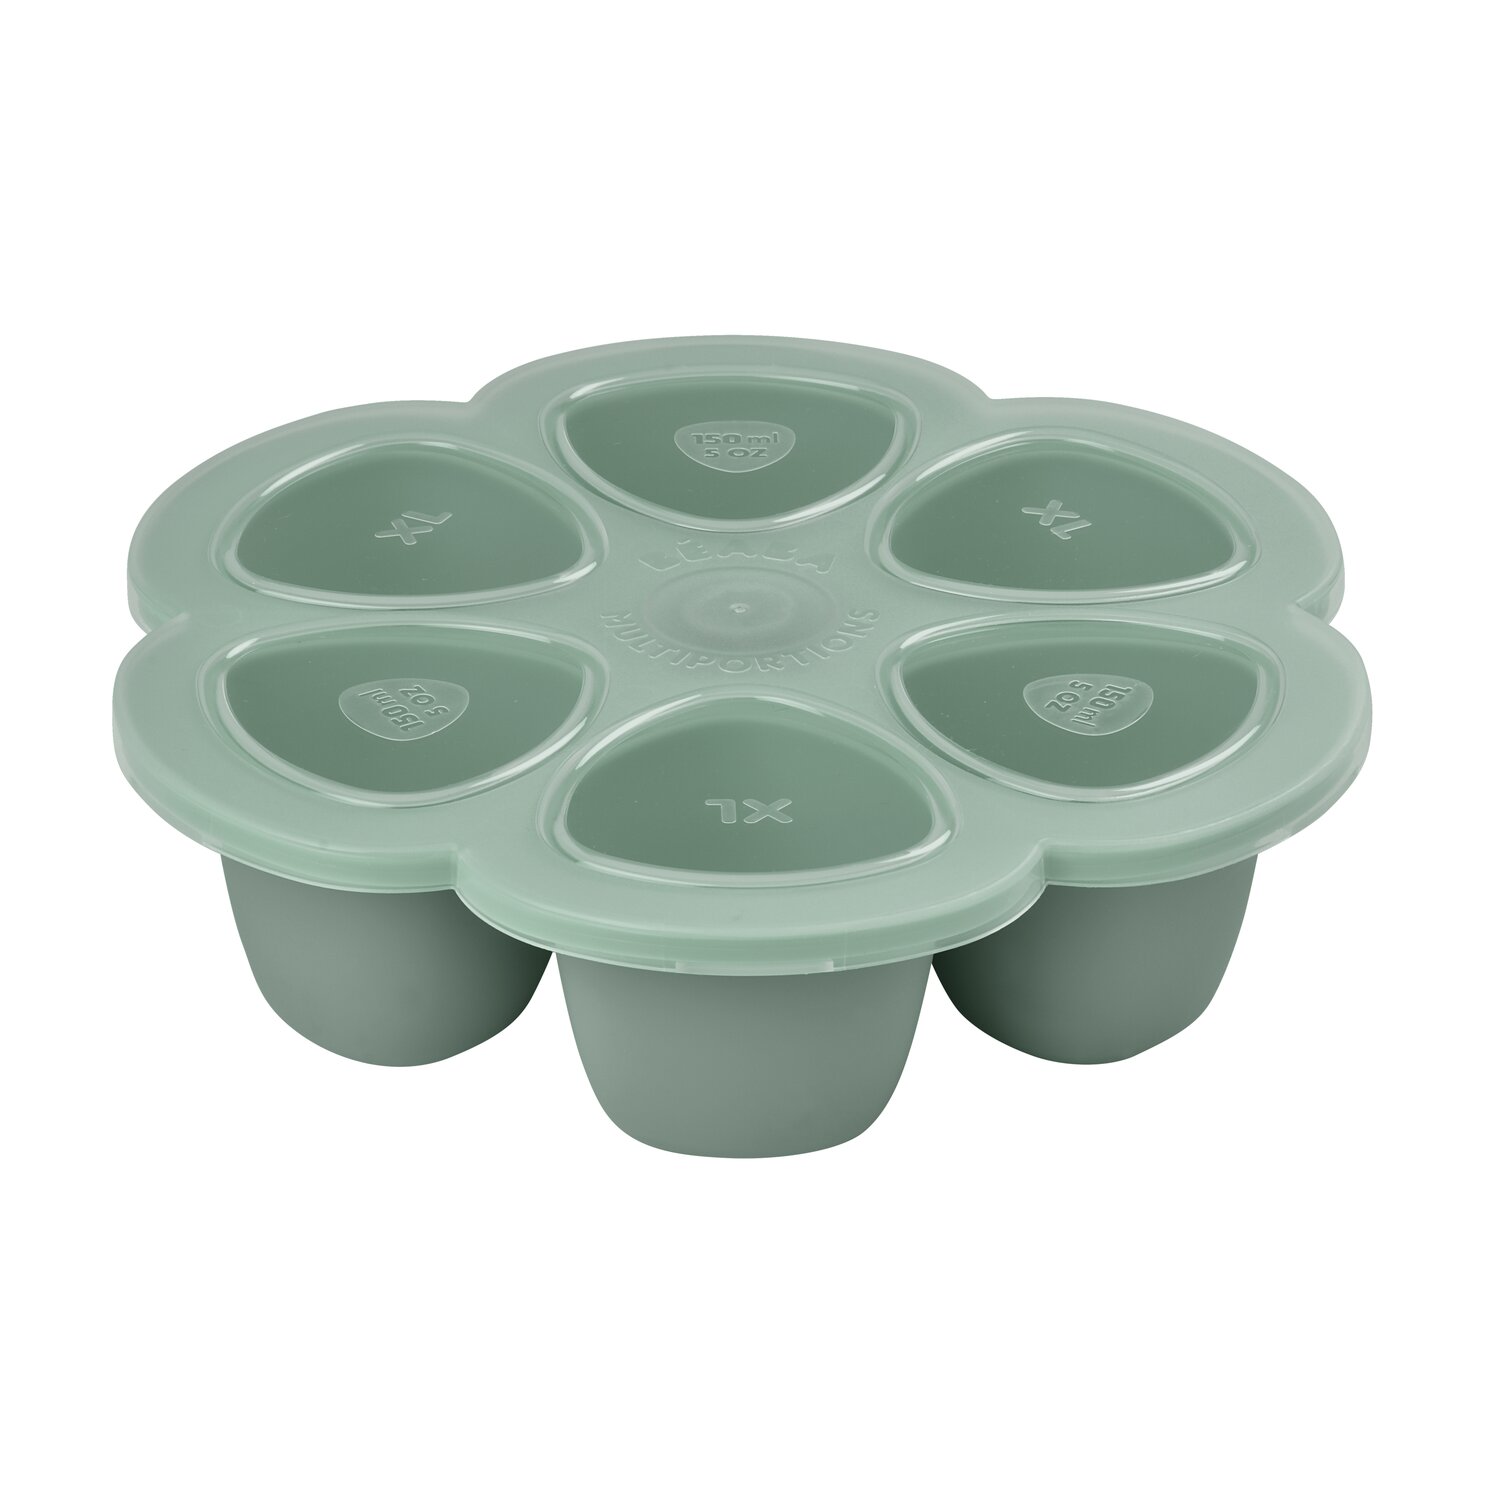 Multiportions silicone 6 x 150 ml sage green Béaba